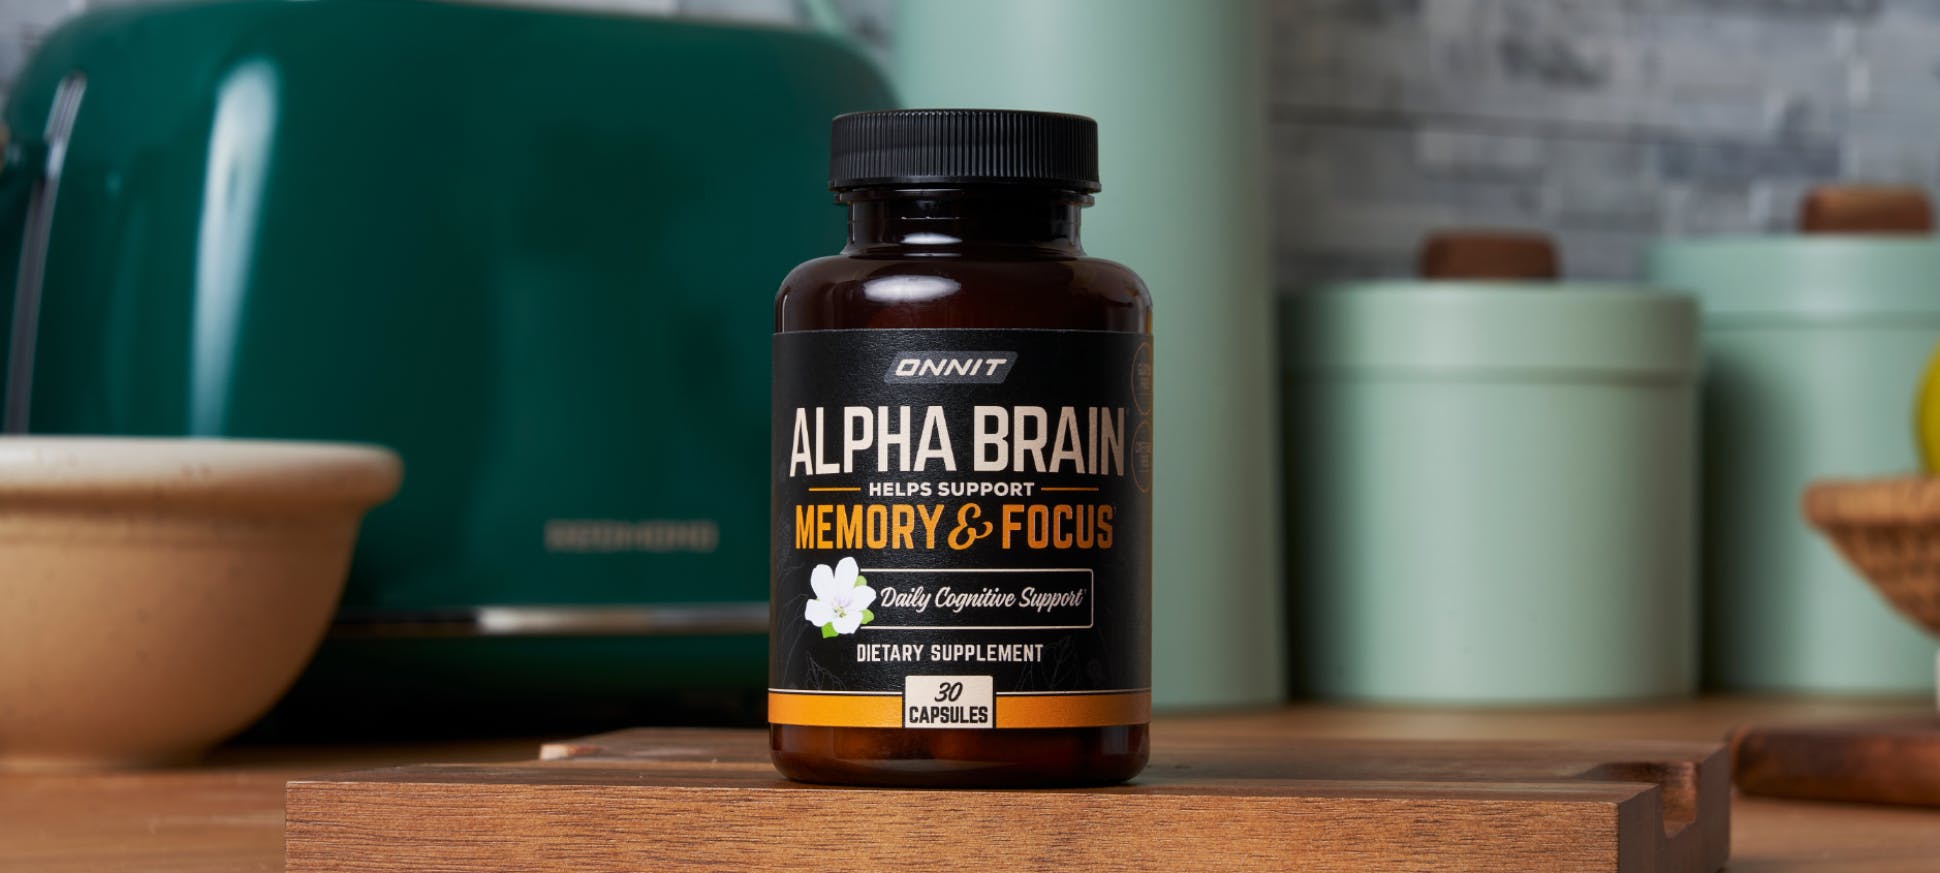 Onnit - Black Friday: 25% off the Alpha BRAIN Family 🧠 For three weeks  only, we'll be slashing prices on ALL our inventory. 💊 25% OFF SUPPLEMENTS  🏋️‍♀️ 10% OFF FITNESS 🚪